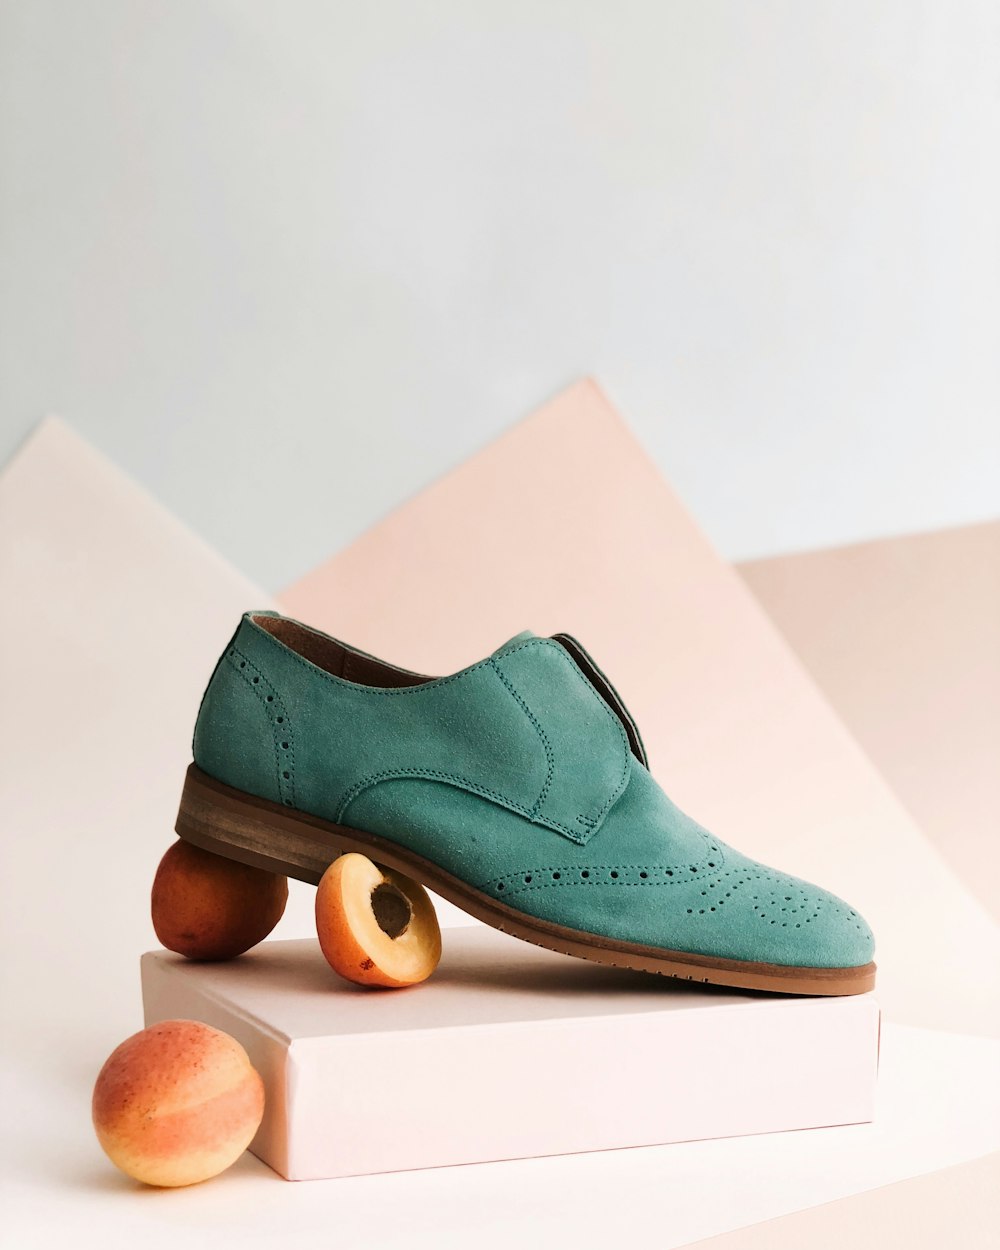 unpaired green leather shoe on top of white box